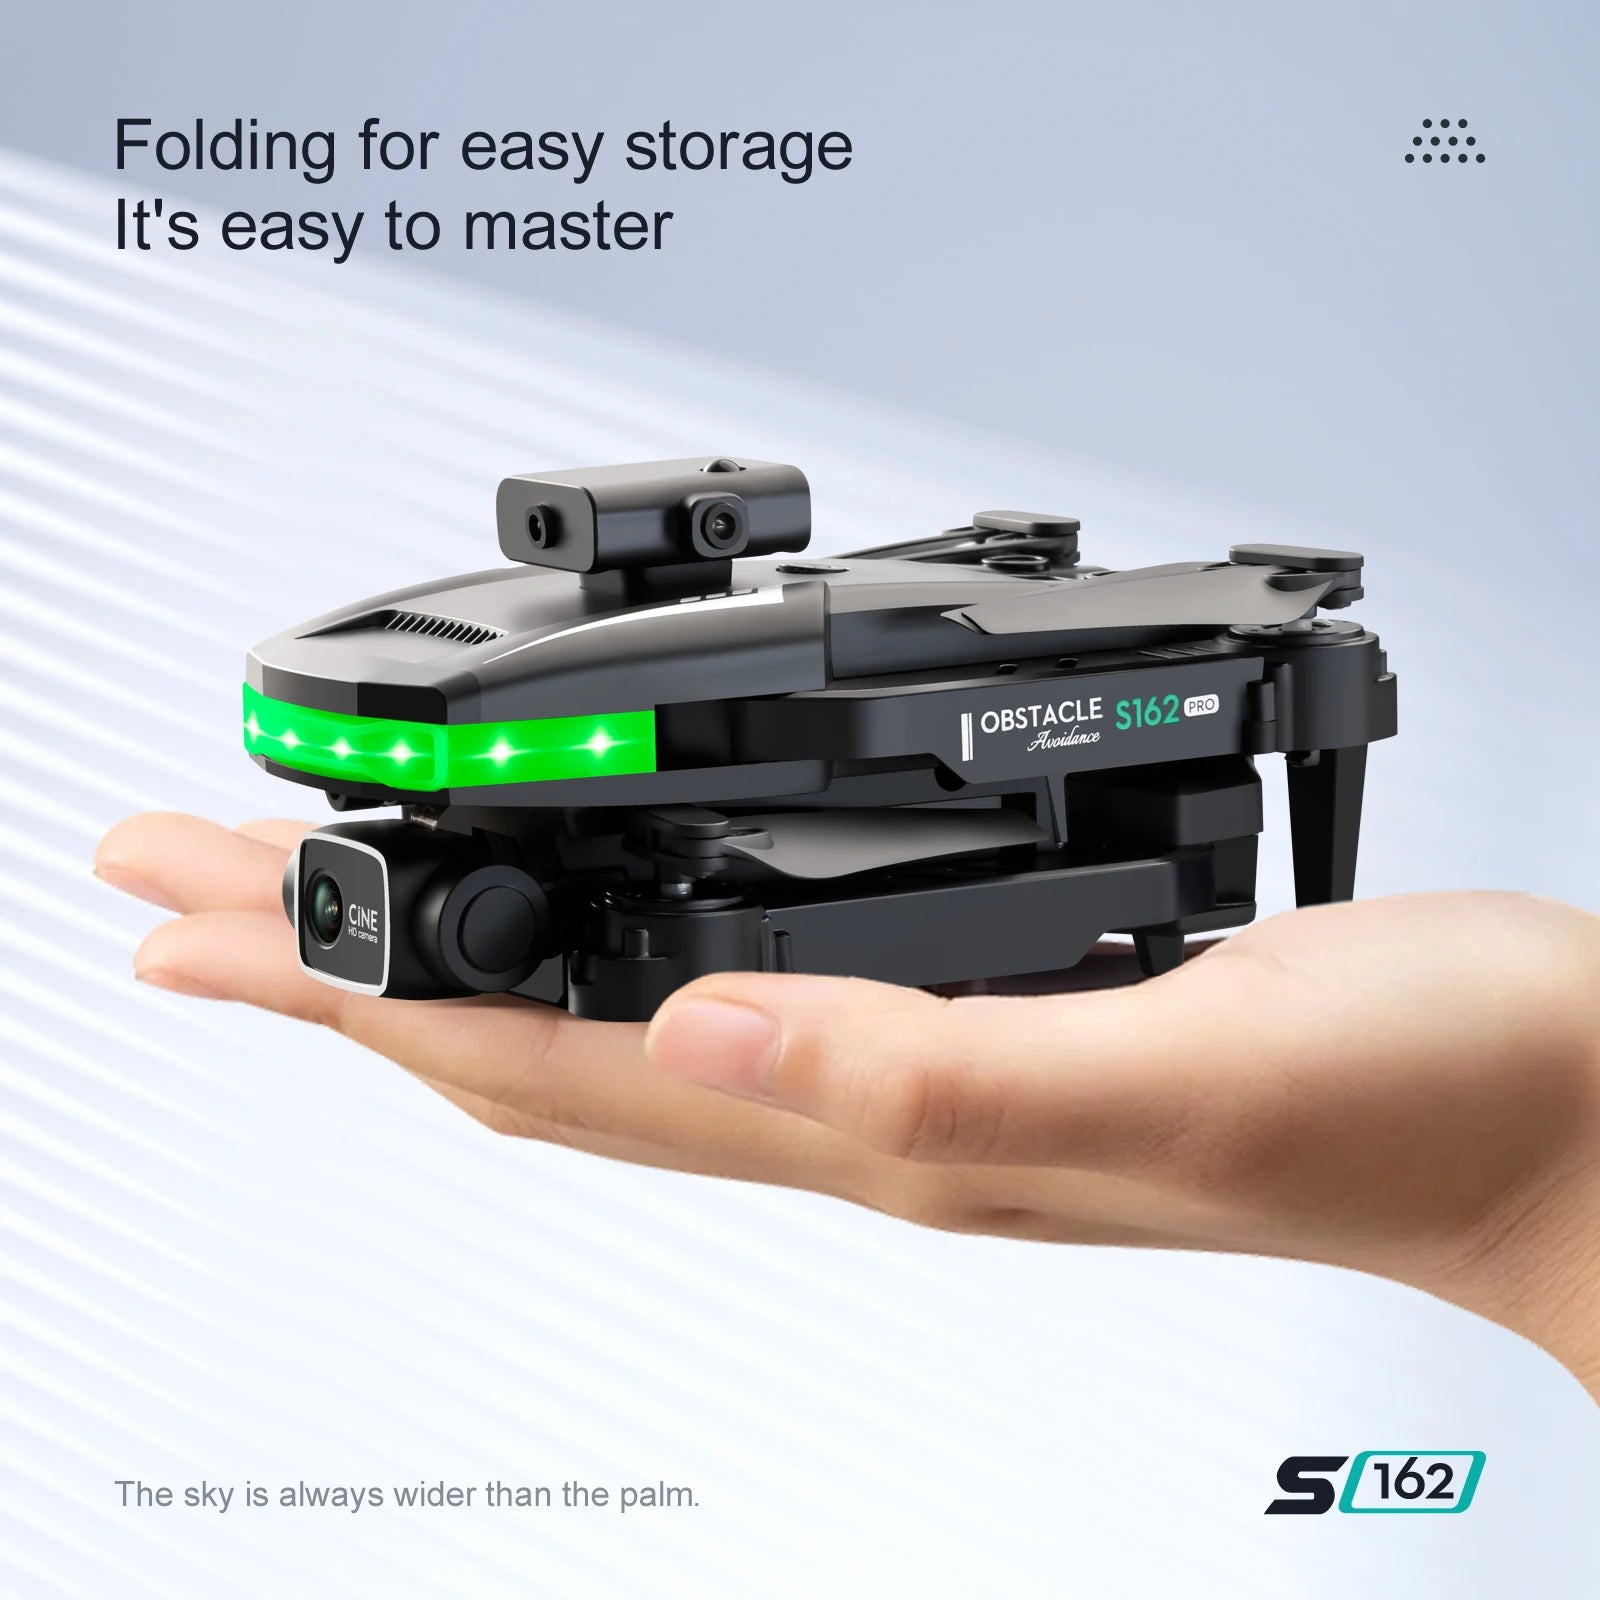 S162 Pro Drone, the sky is always wider than the 5 162 obstacle avoidance de